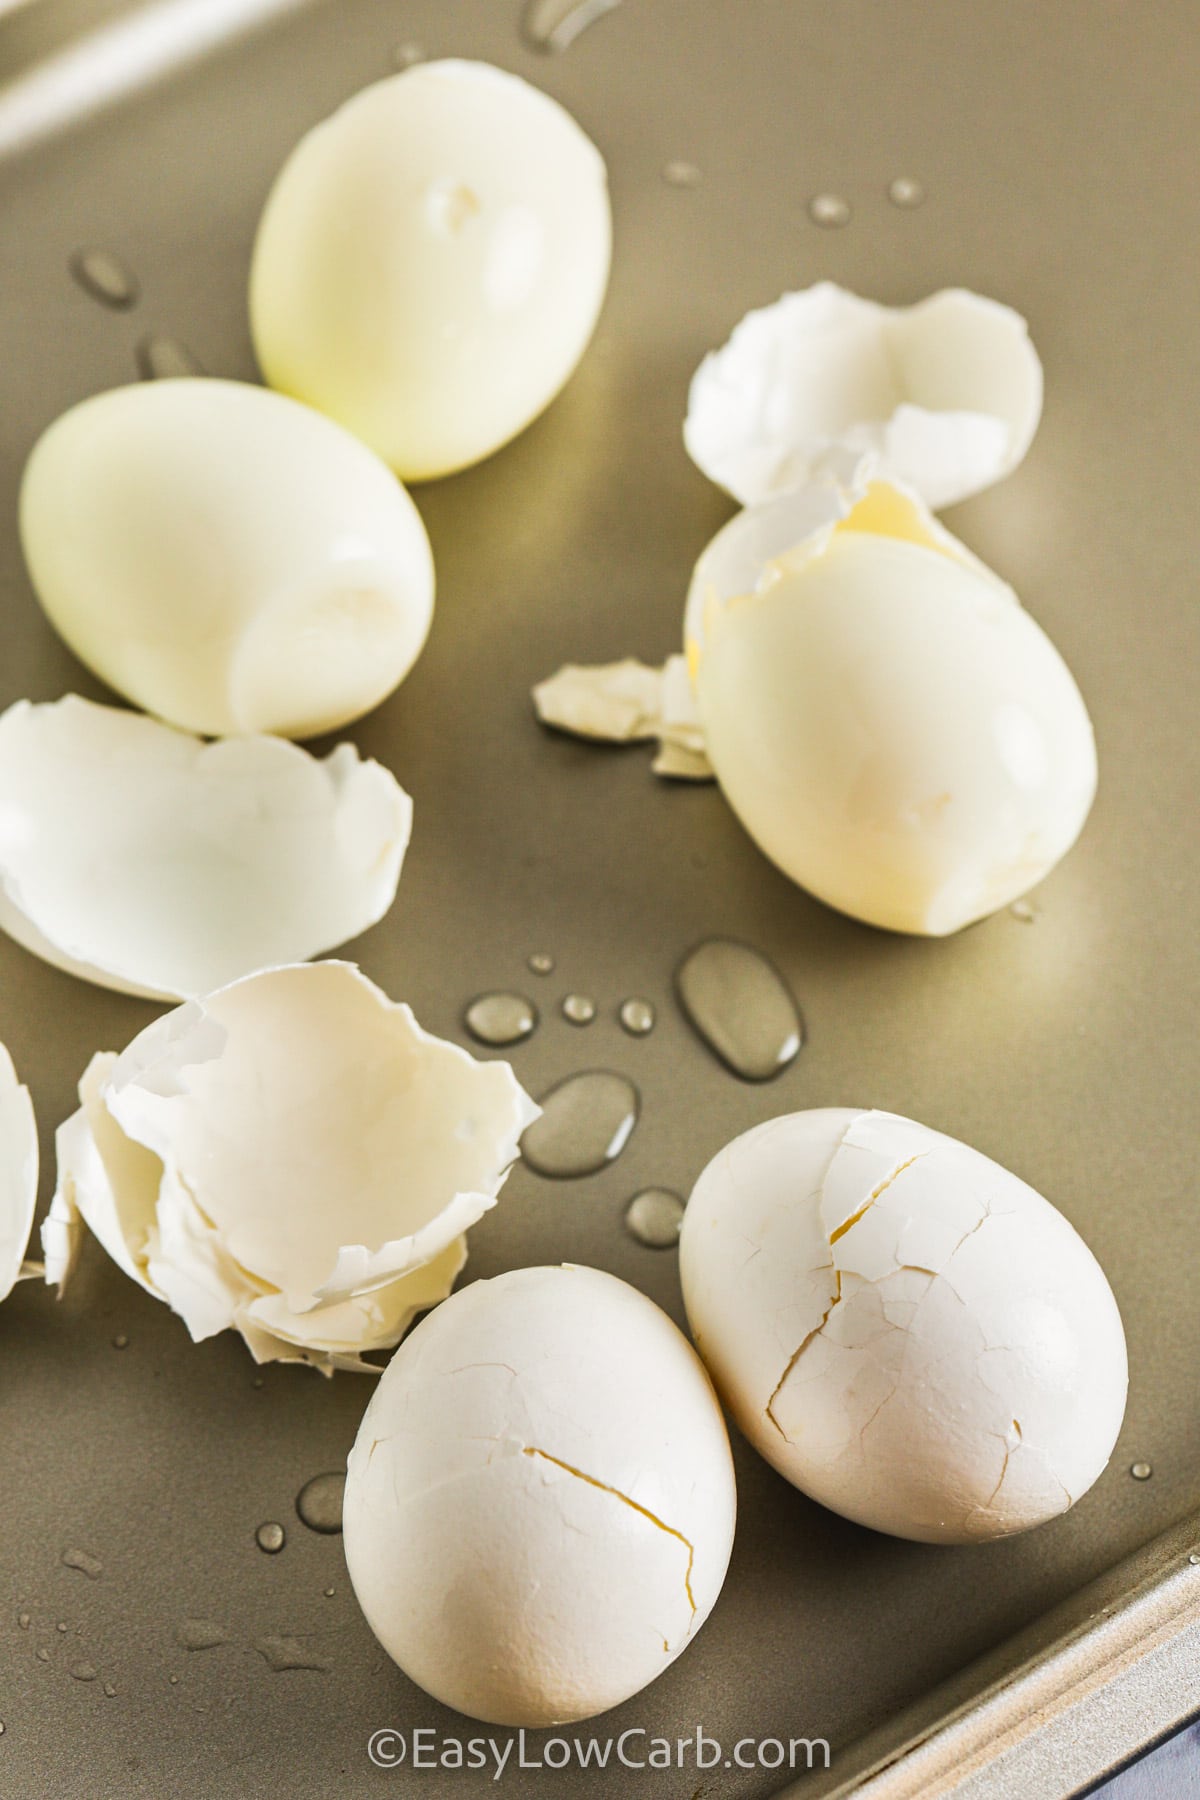 Hard Boiled Eggs being peeled on a baking sheet